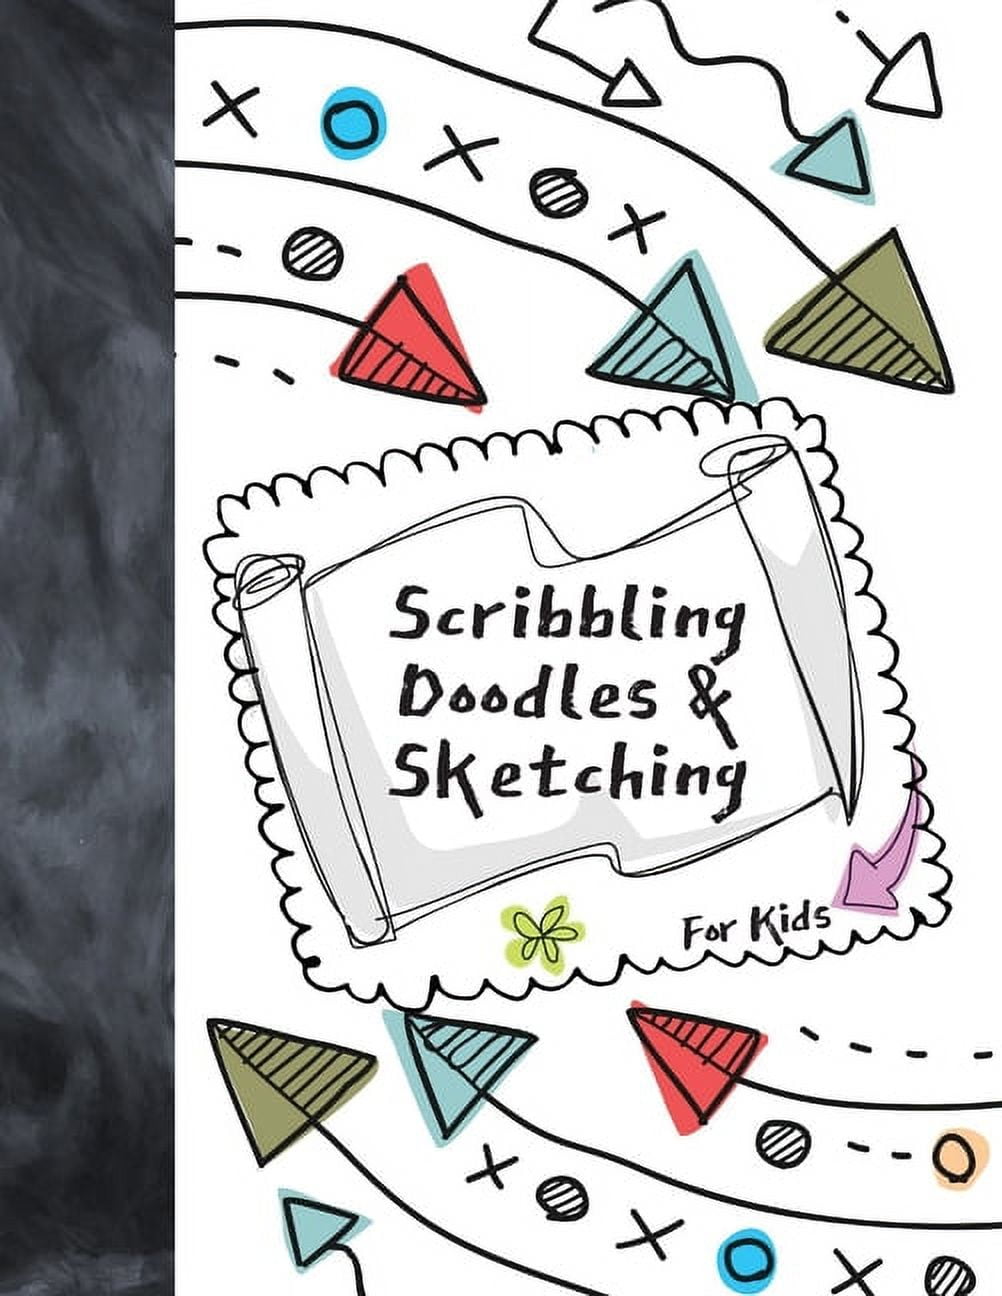 Scribbling Doodles & Sketching For Kids : Sketchbook Drawing Art Book For  Girls And Boys - Sketchpad For Art On Black Paper Pages To Use With Chalk